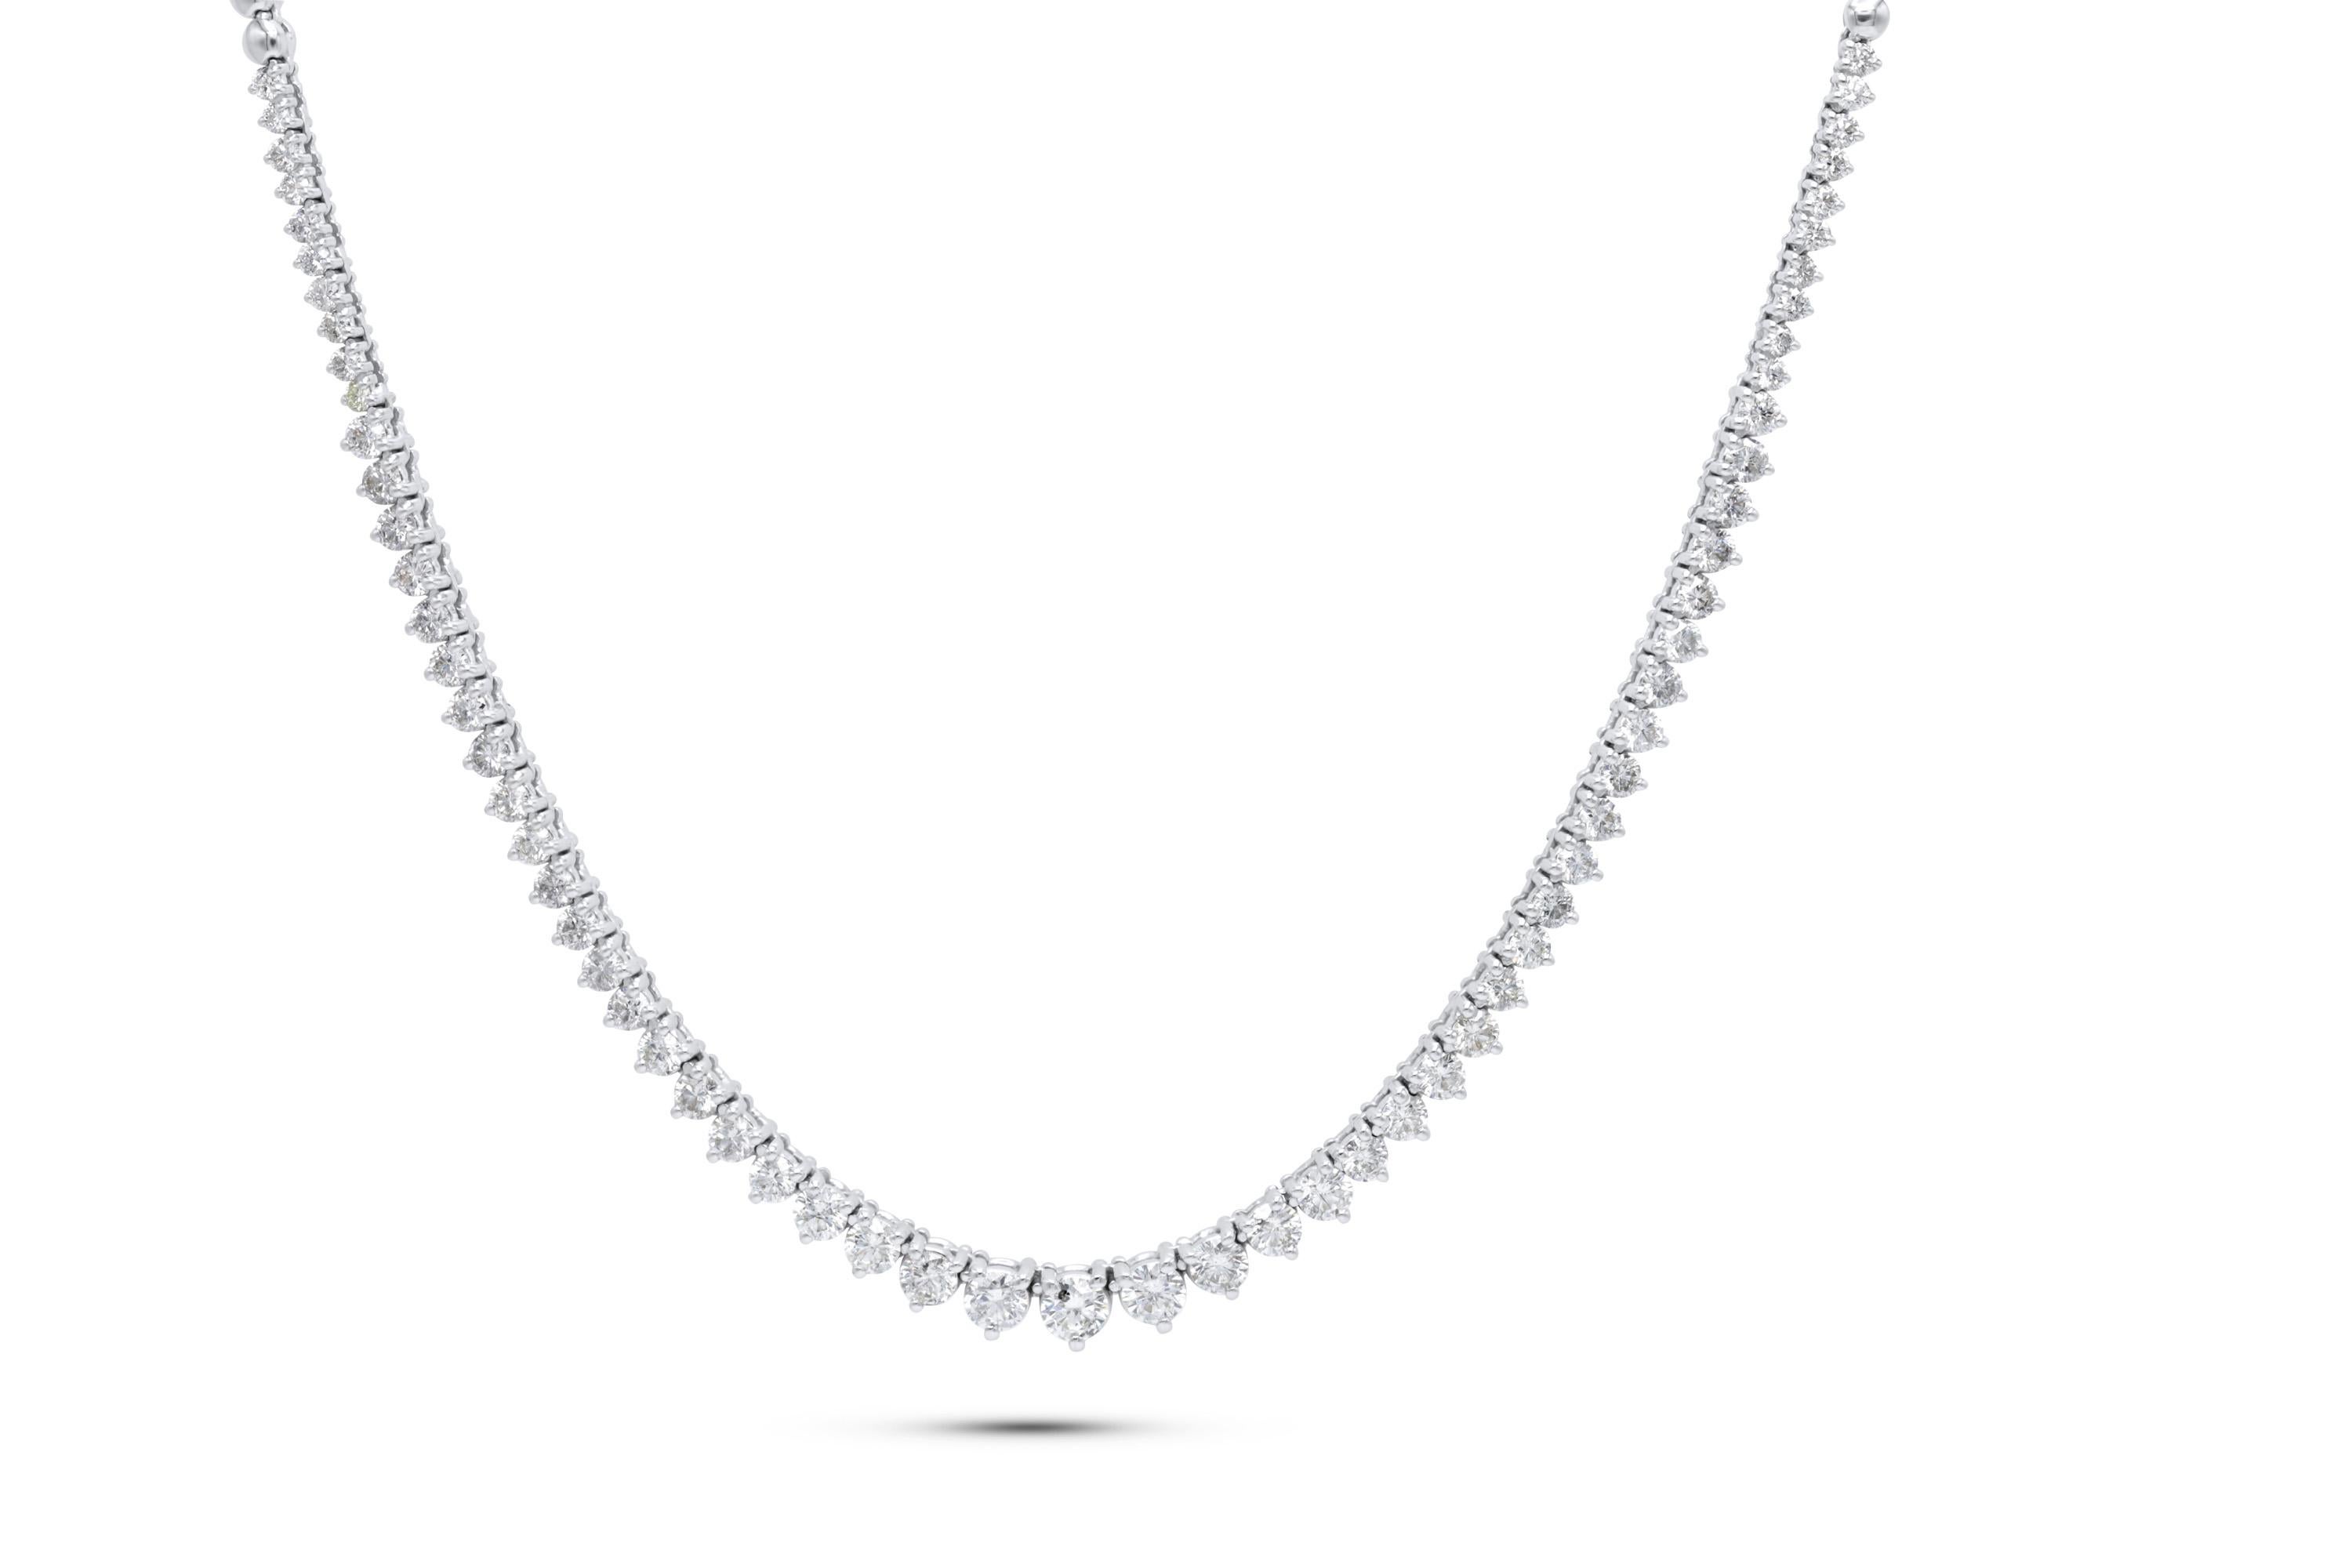 Custom 18k white gold graduated half way diamond tennis necklace containing 5.15 cts of round brilliant cut diamonds.Color FG SI clarity. Excellent cut 